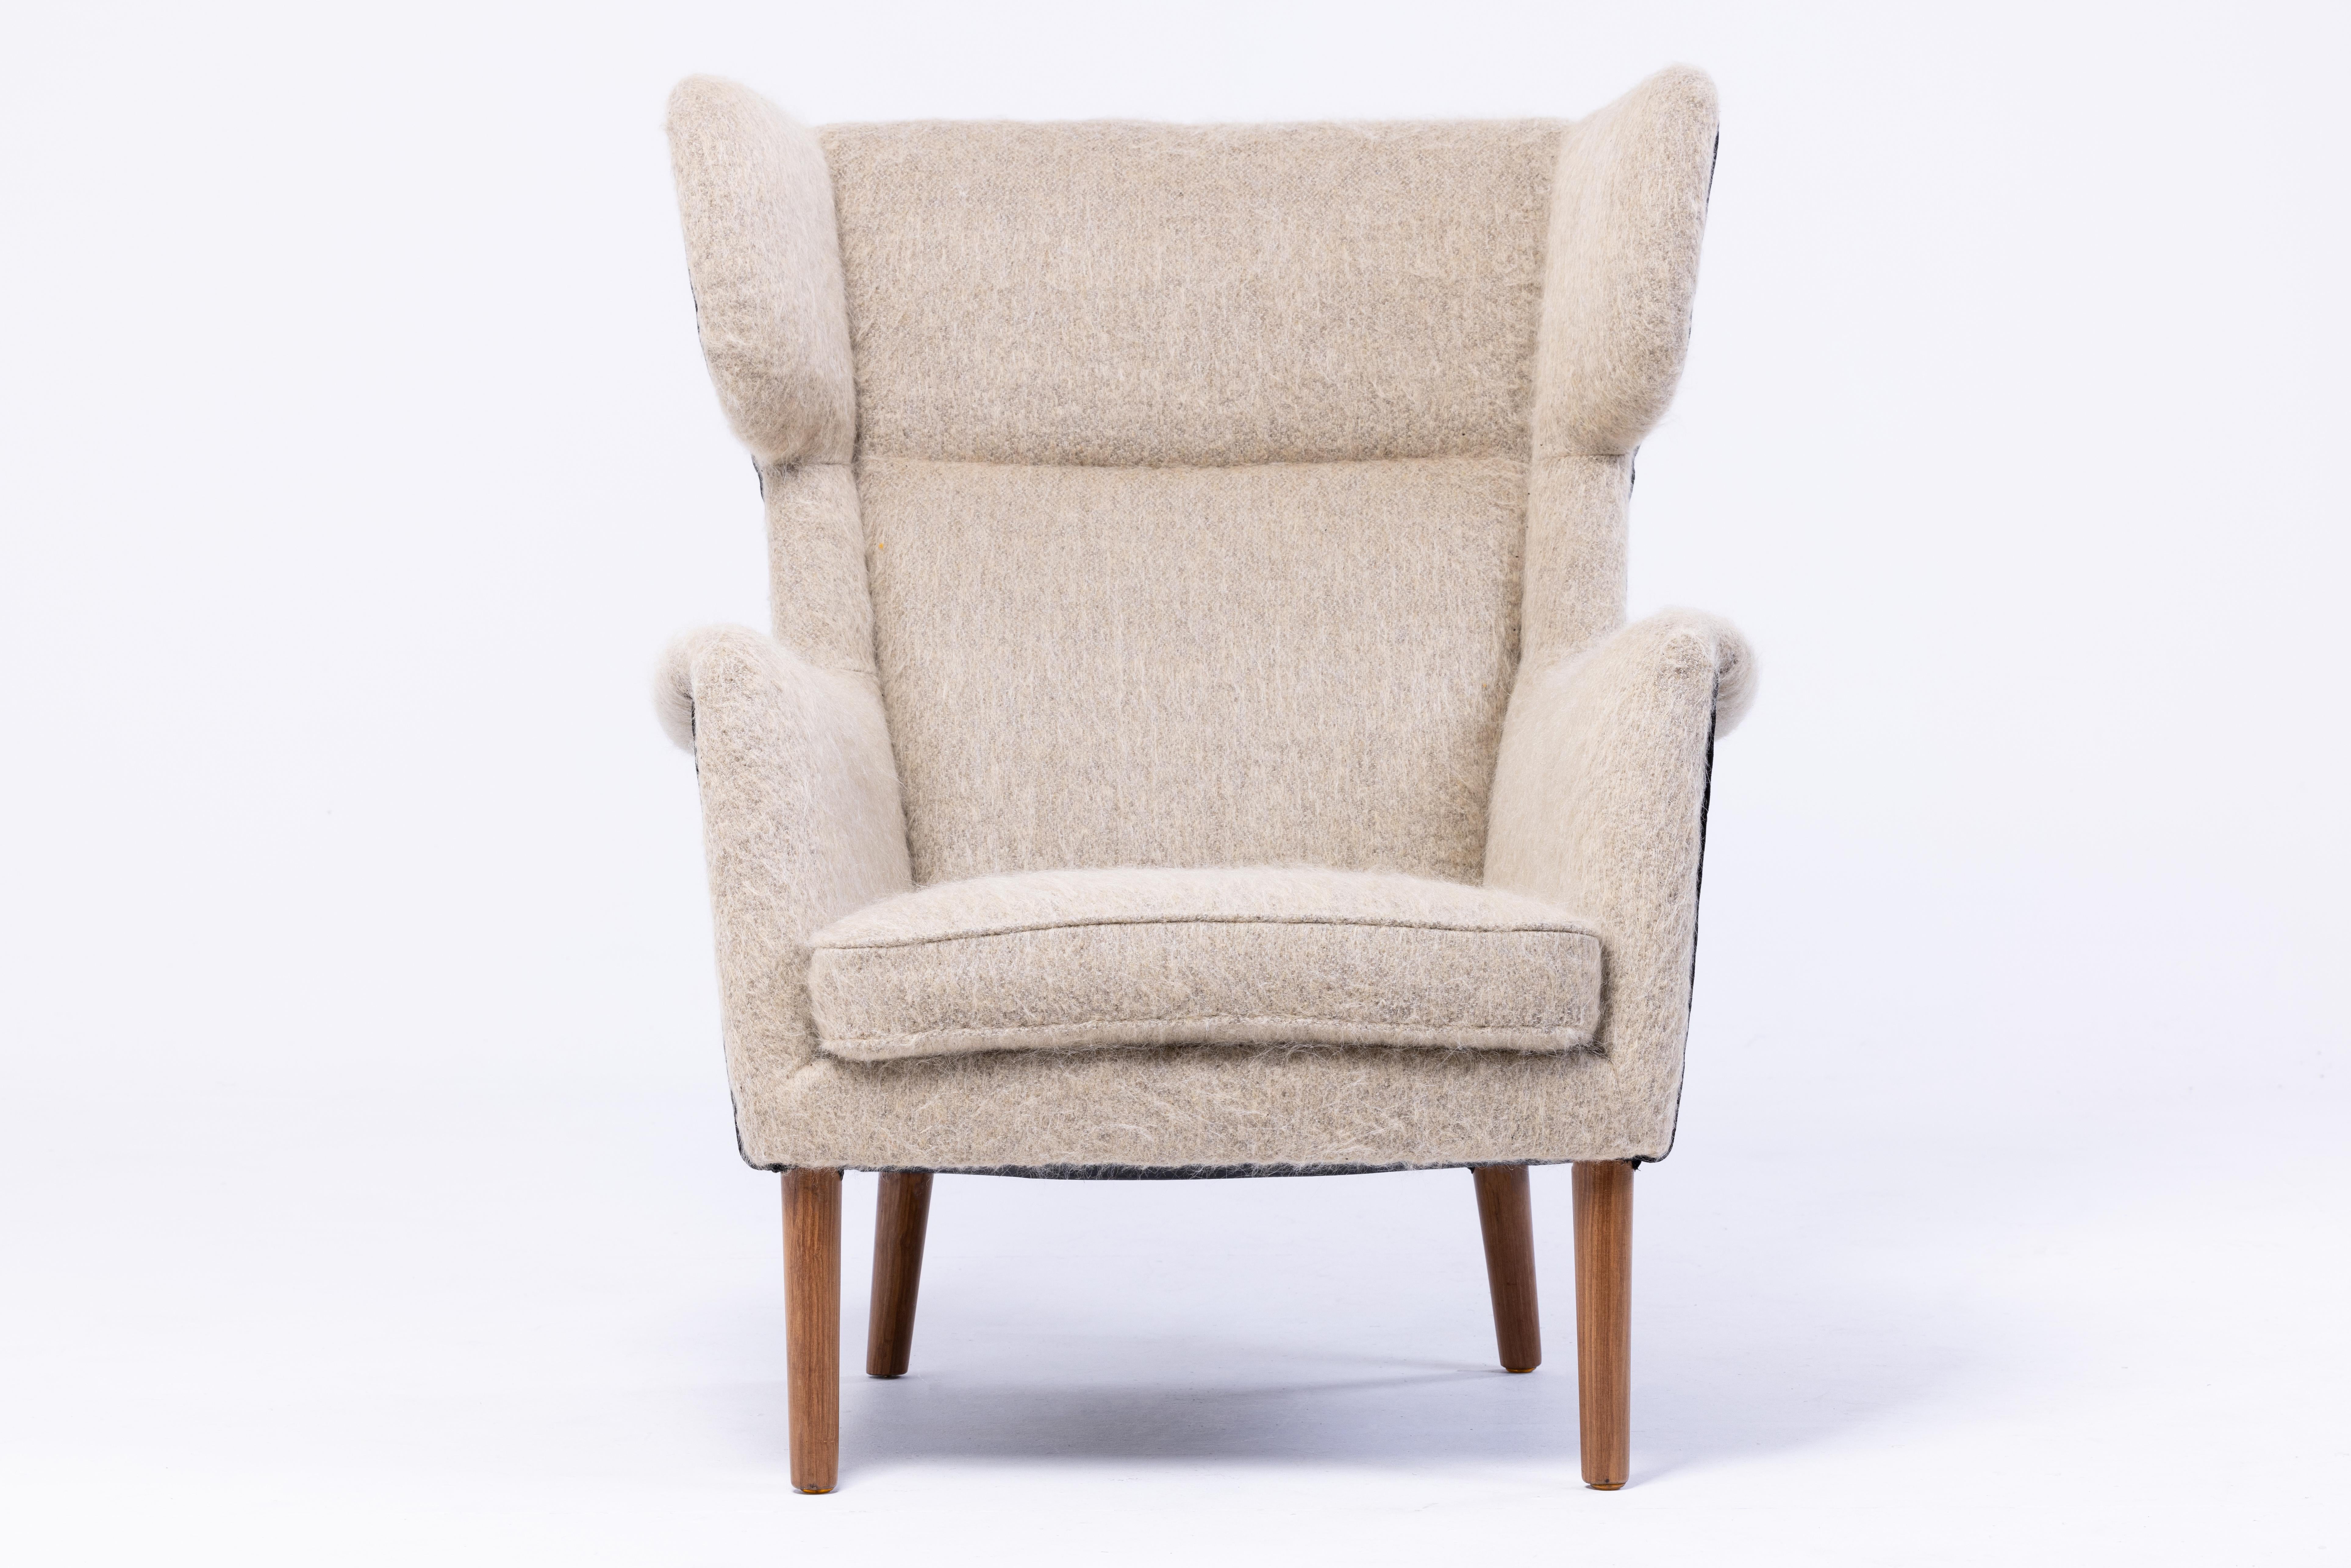 Splendid wingback armchair, Denmark 1950s, entirely restored and reupholstered with a velvet by Hèrmes and a mohair and alpaca fabric by Pierre Frey (Yeti), legs in teak wood.